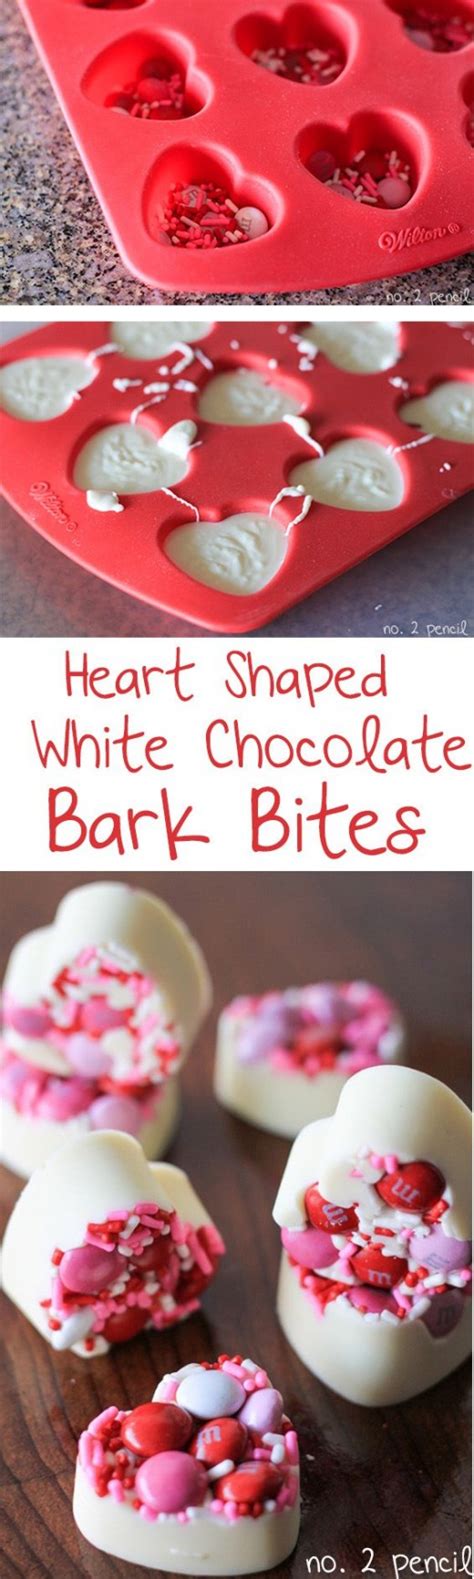 White Chocolate Heart Shaped Bark Bites From Number 2